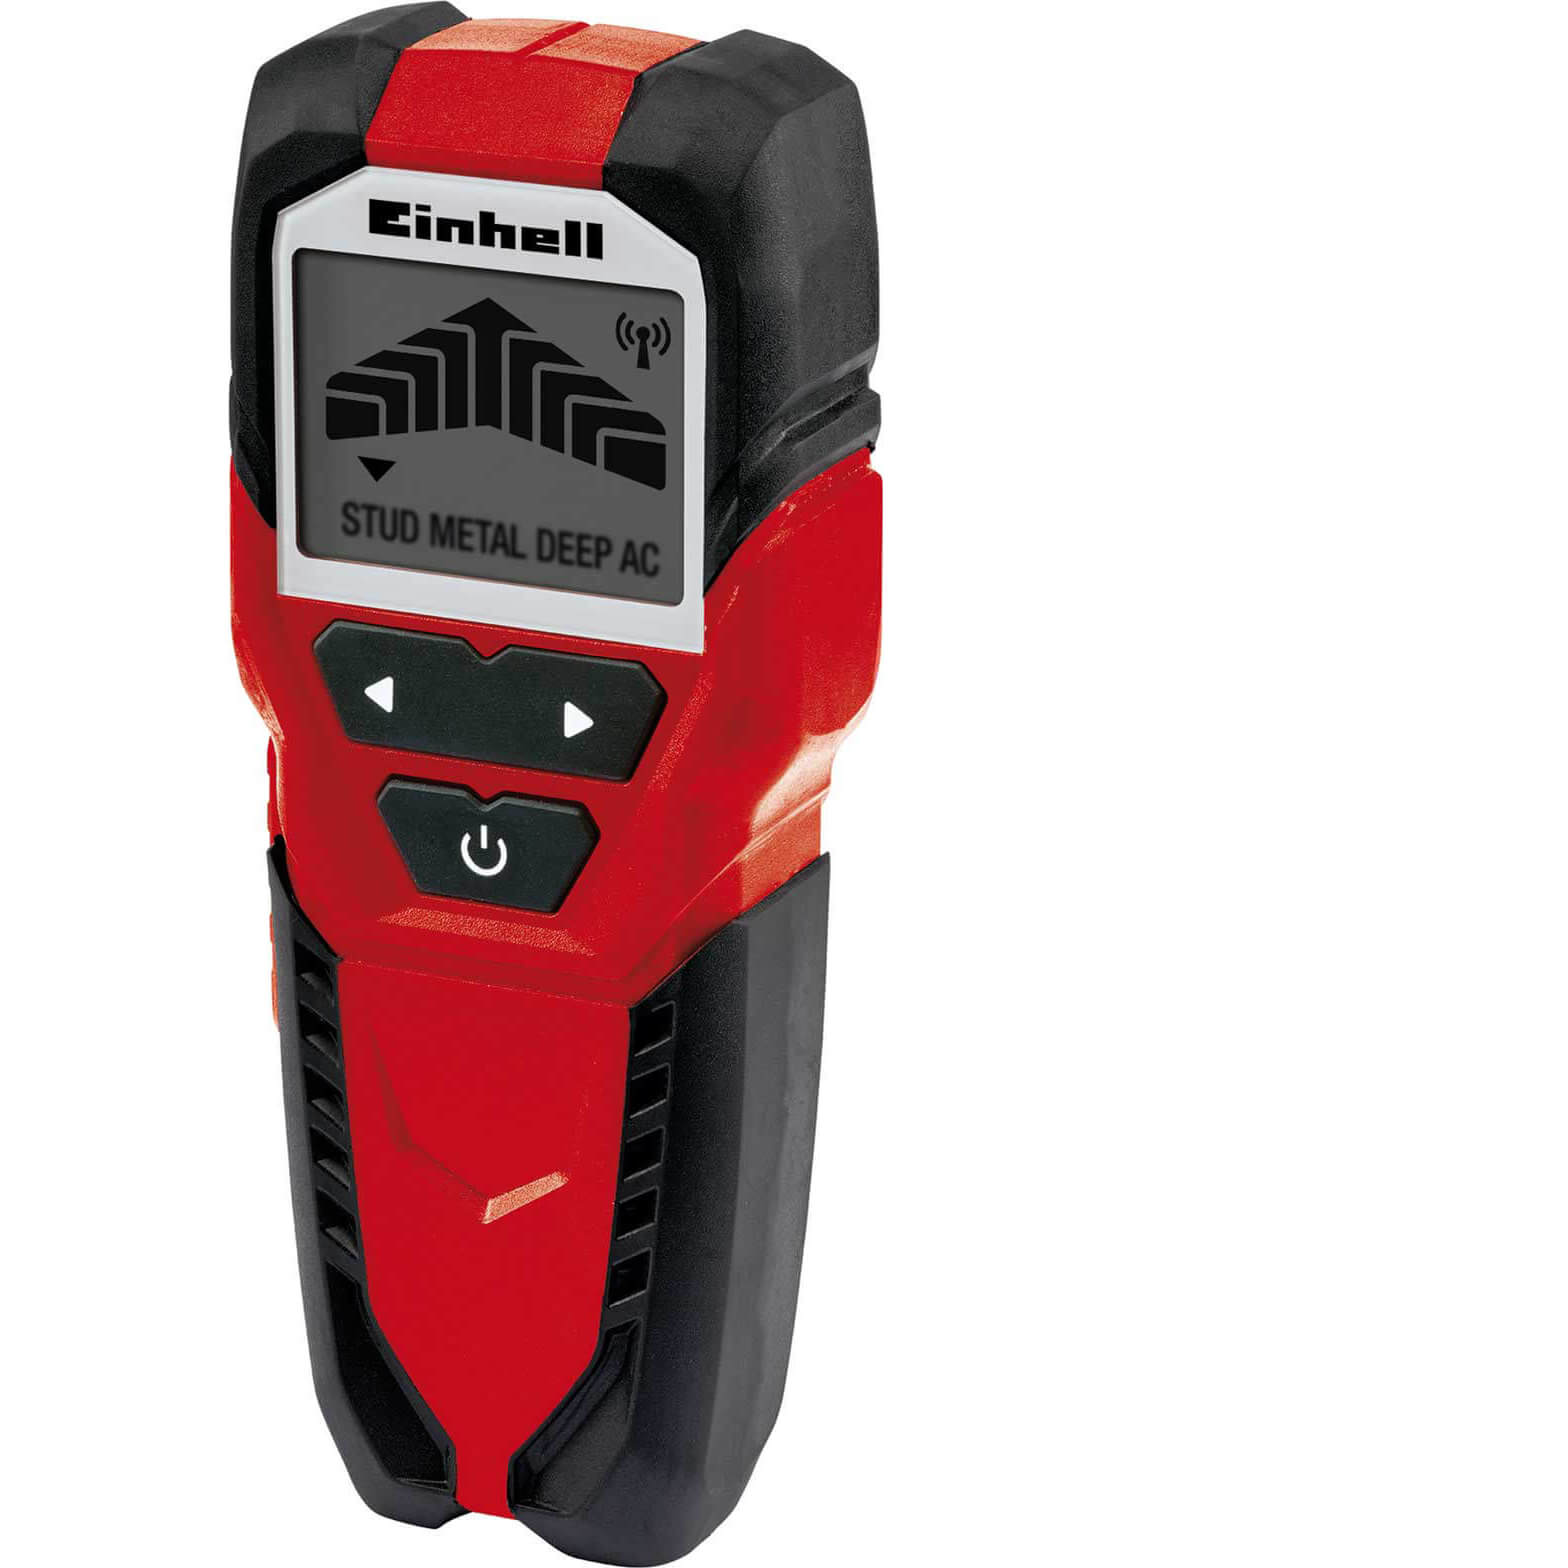 Photo of Einhell Tc-md 50 Digital Cable- Metal And Wood Detector